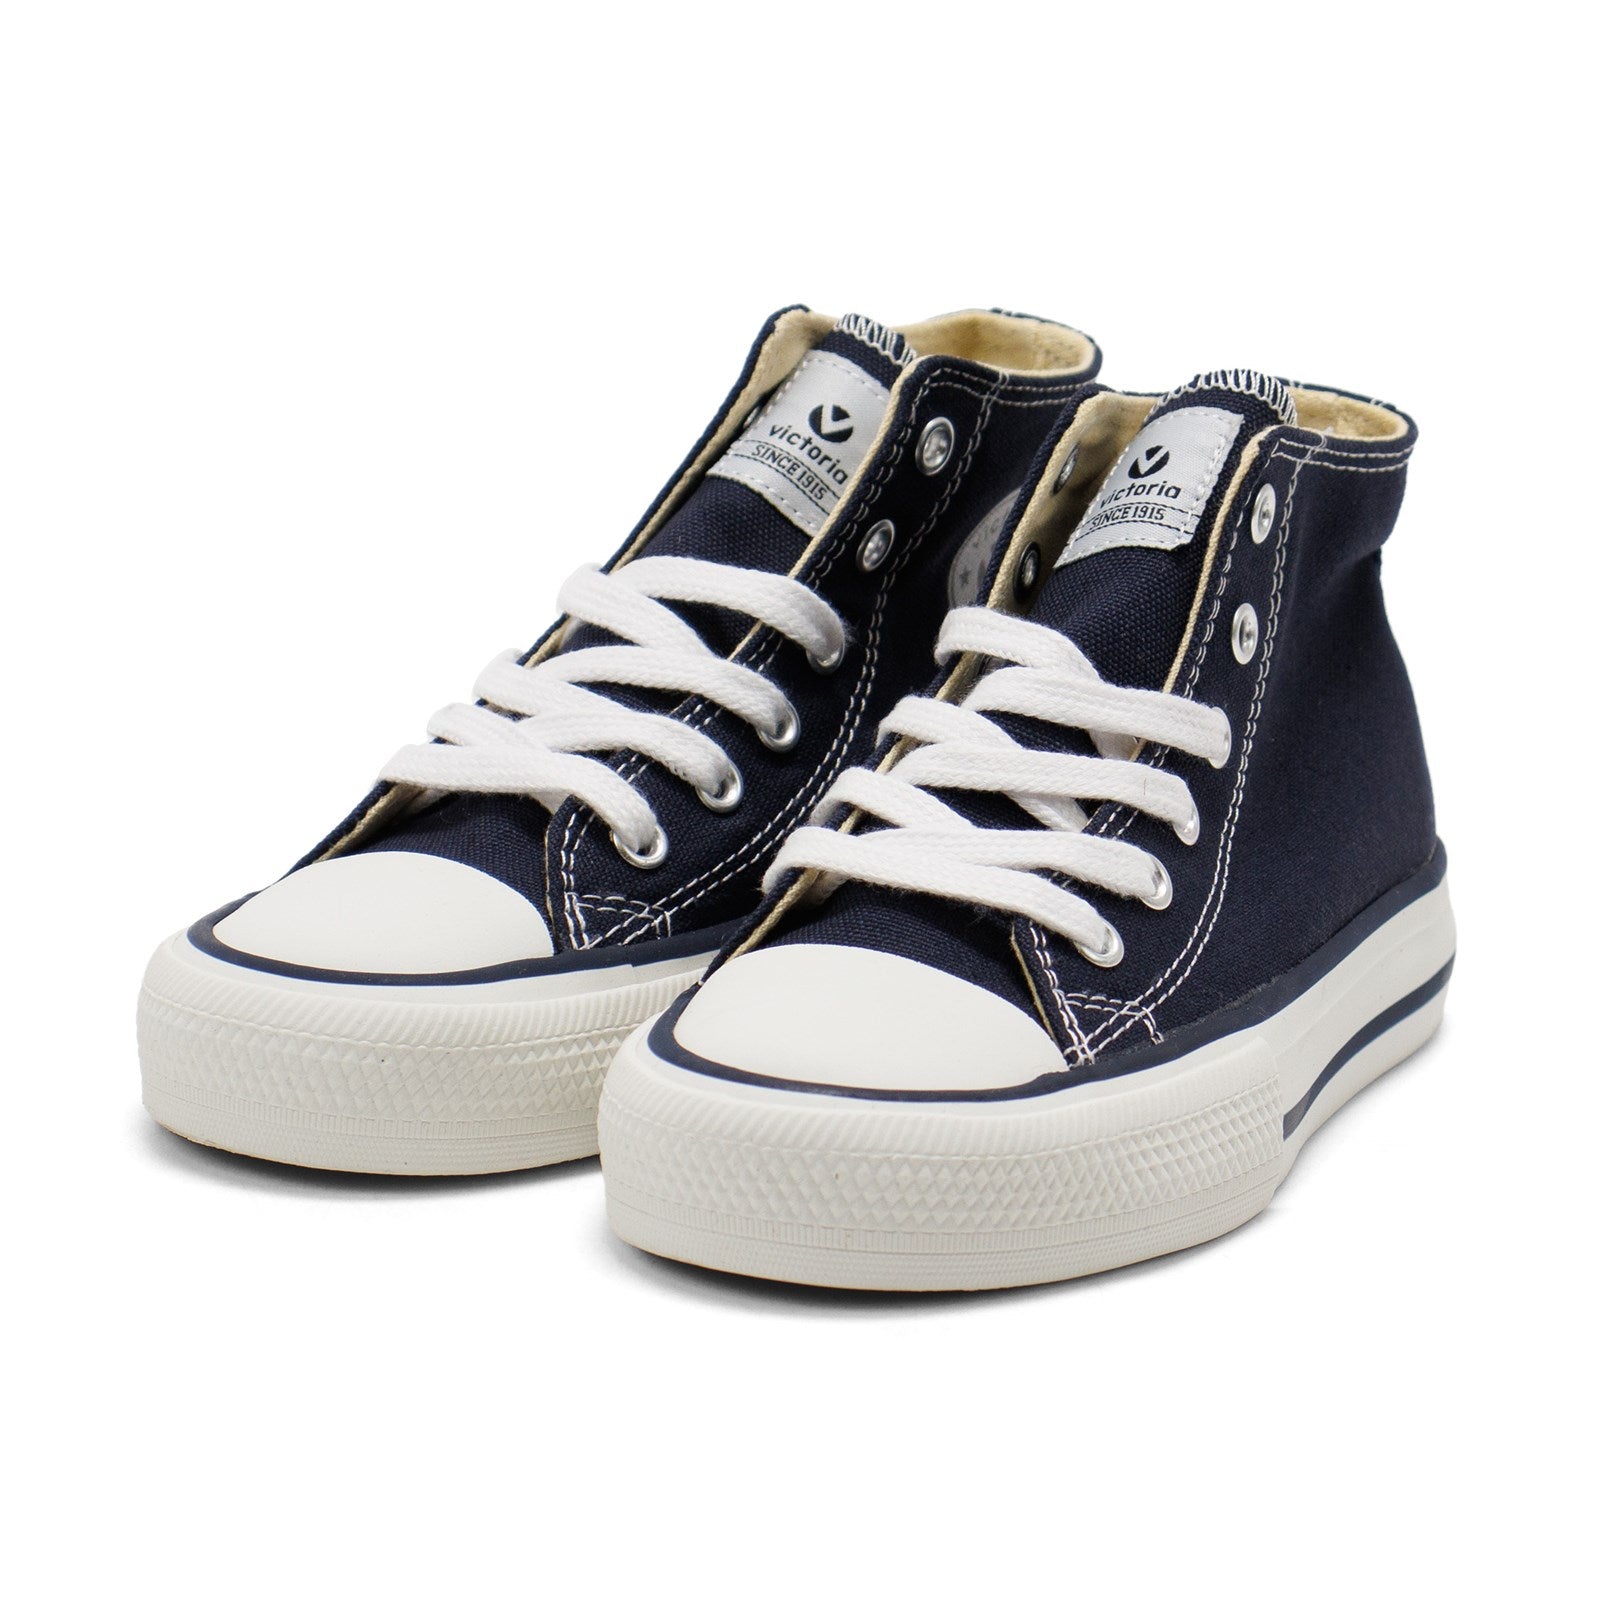 Victoria Boy High-Top Lace-Up Sneakers